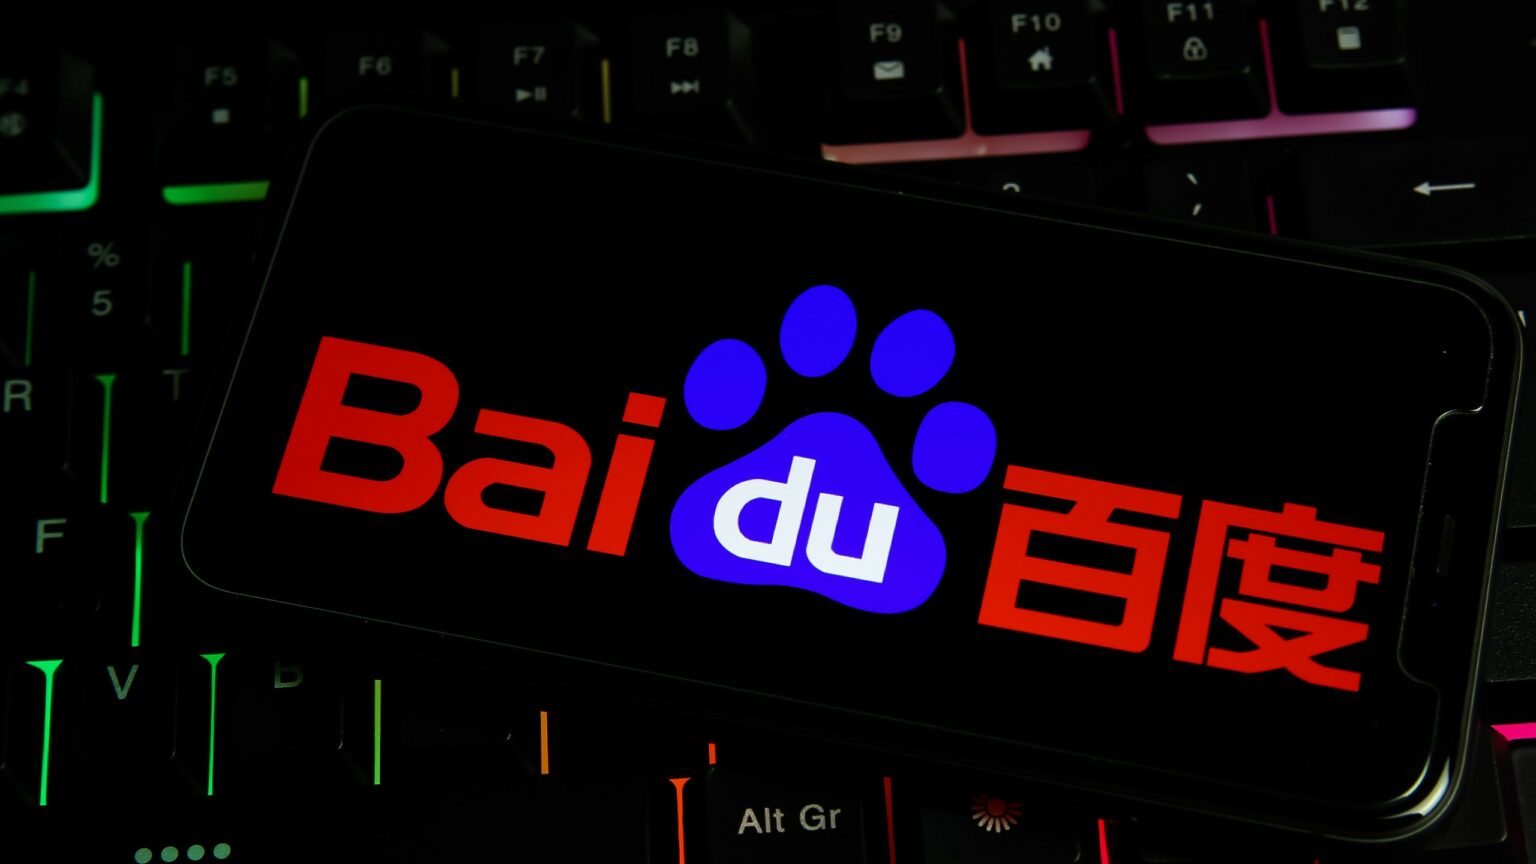 Baidu is Rolling Out a $145M Venture Capital AI Fund